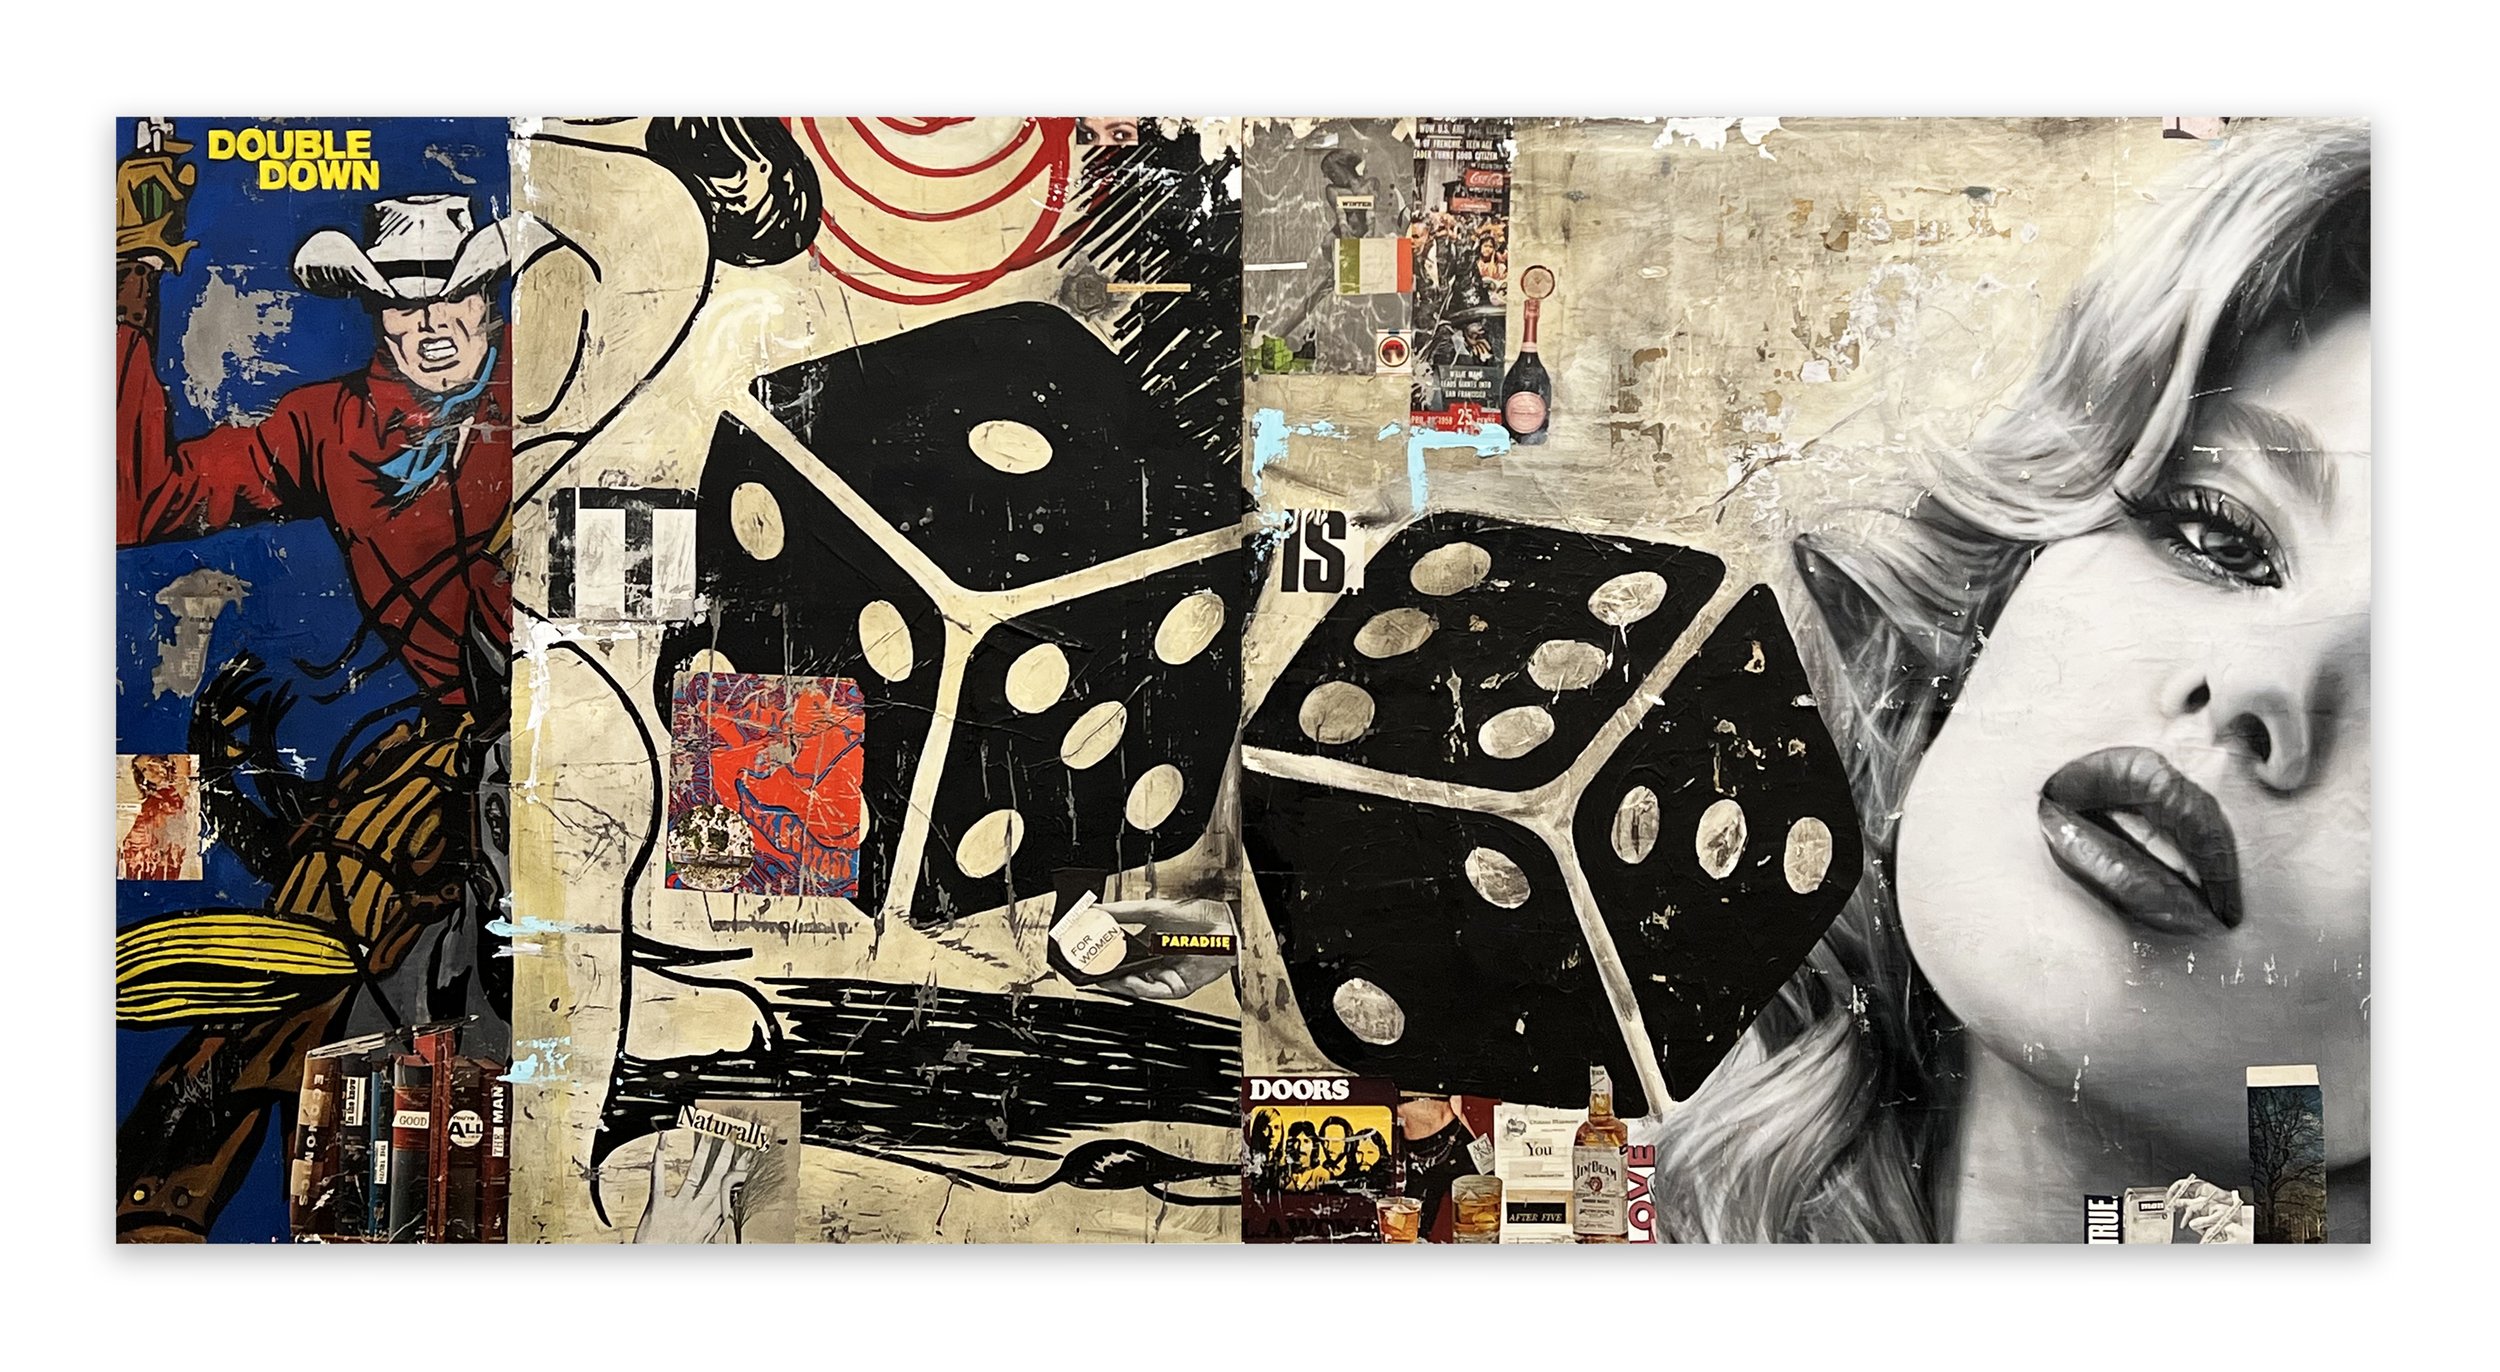 Greg Miller, Double Down, acrylic and collage on canvas, 48” x 96”